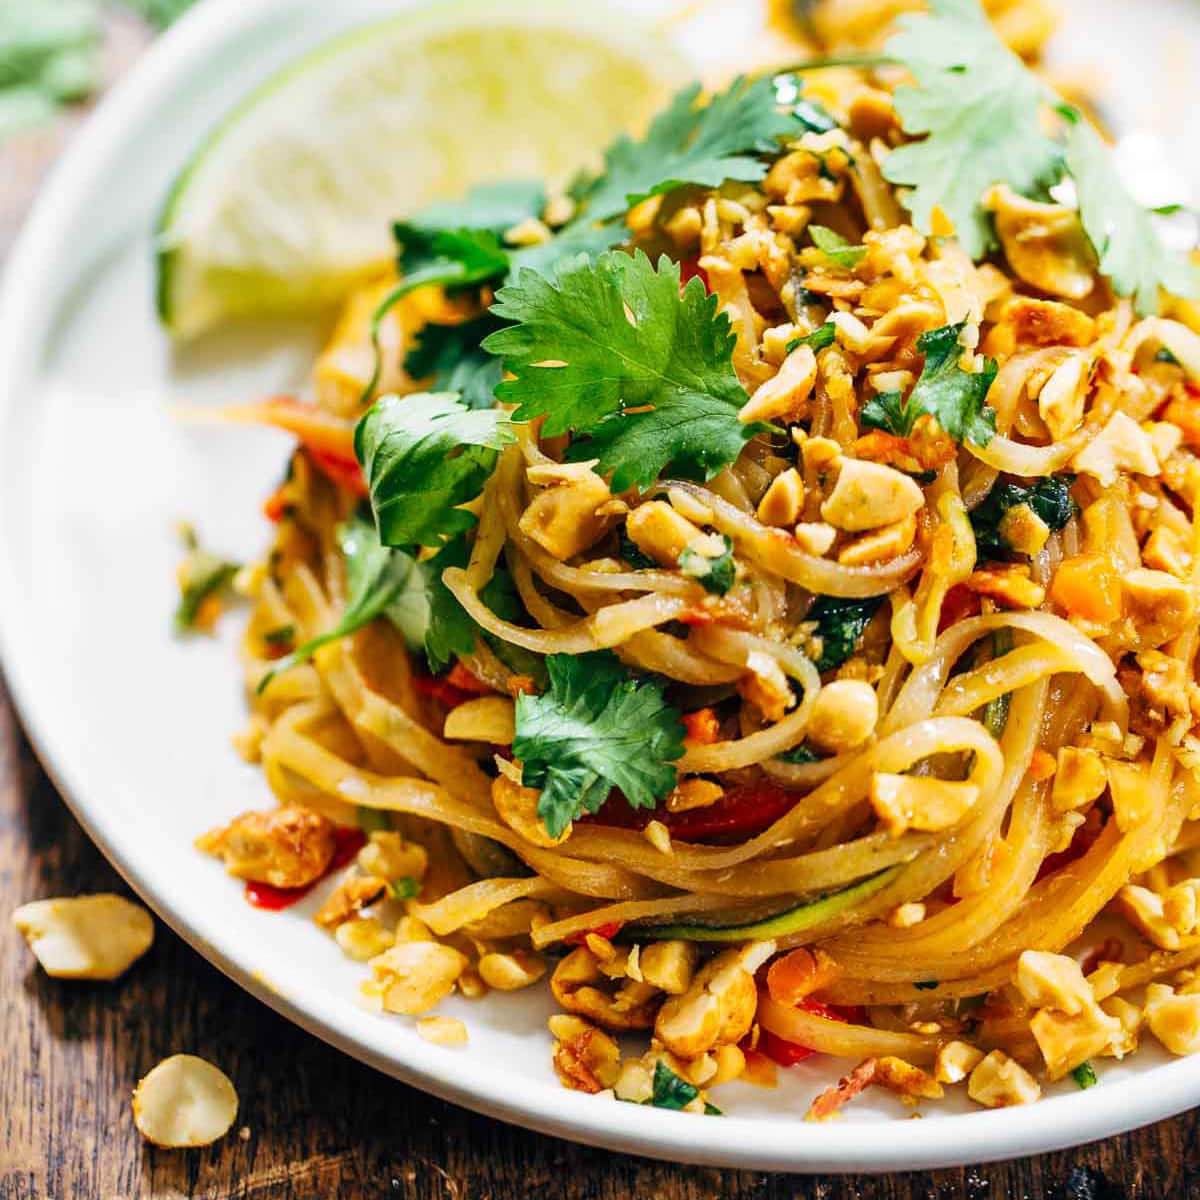 Pad Thai - Top 10 foods you must try in Thailand